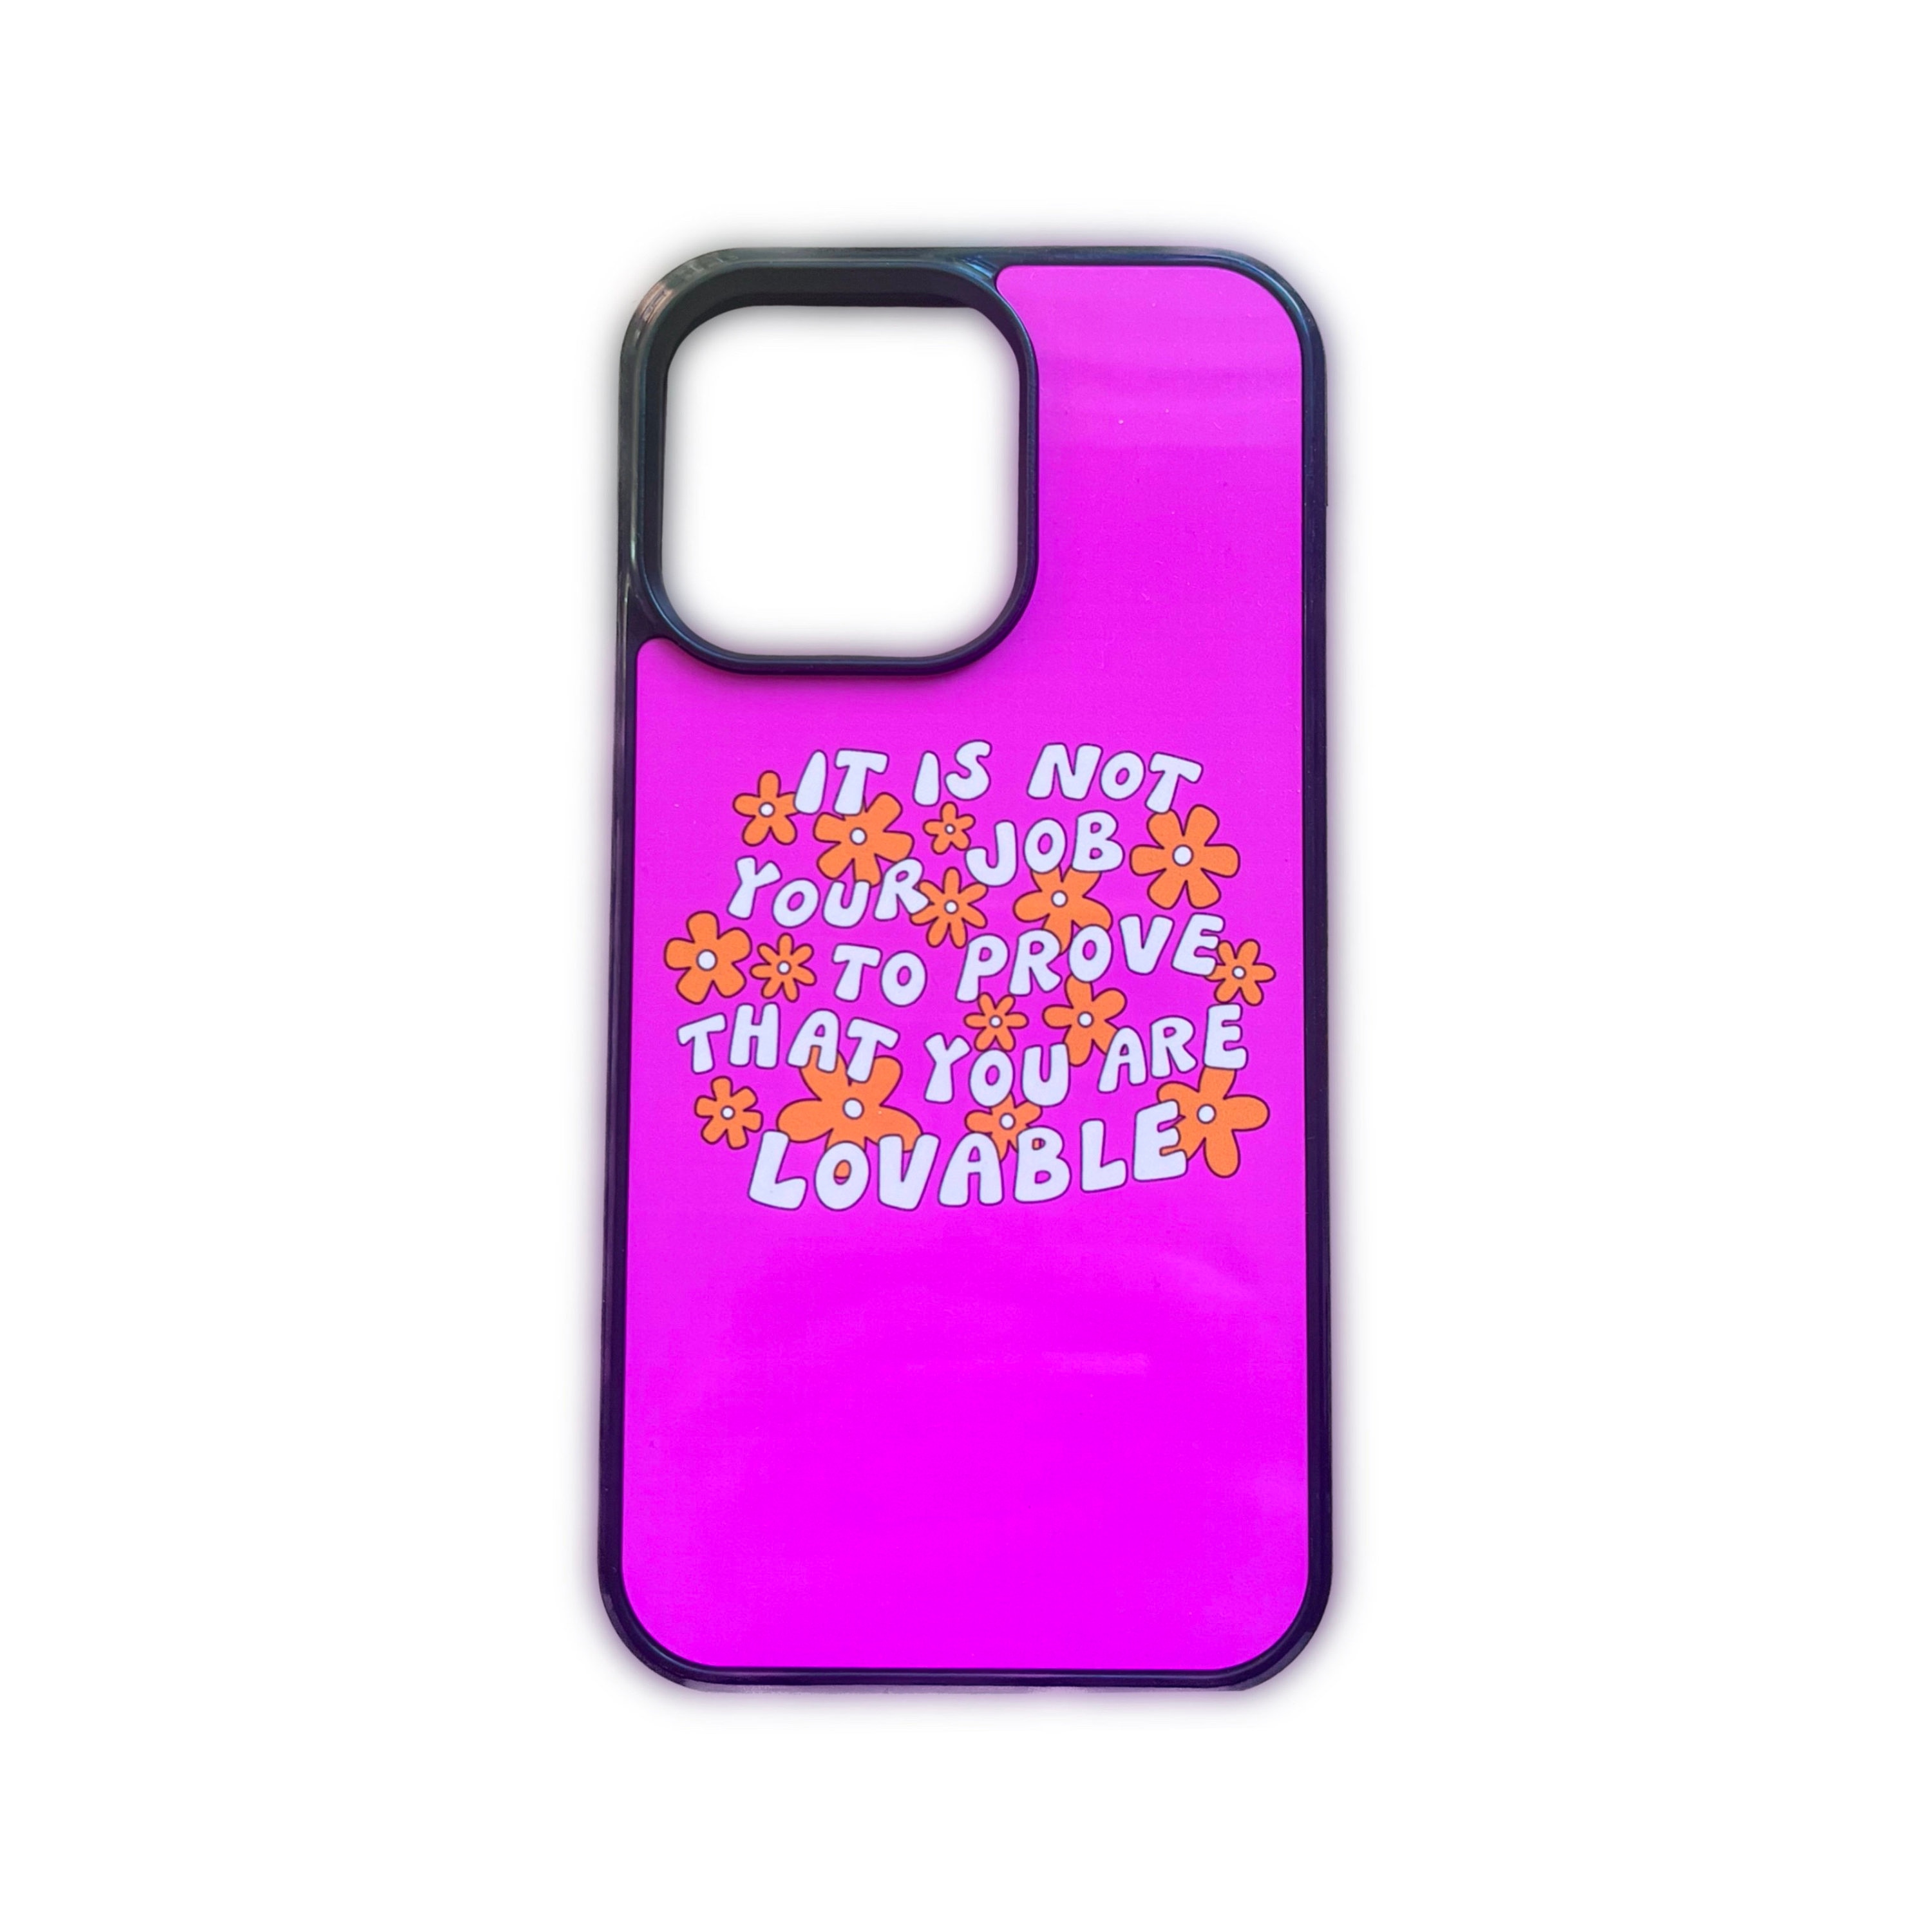 Youre Lovable Phone Case || iPhone Case || Quote Phone Case